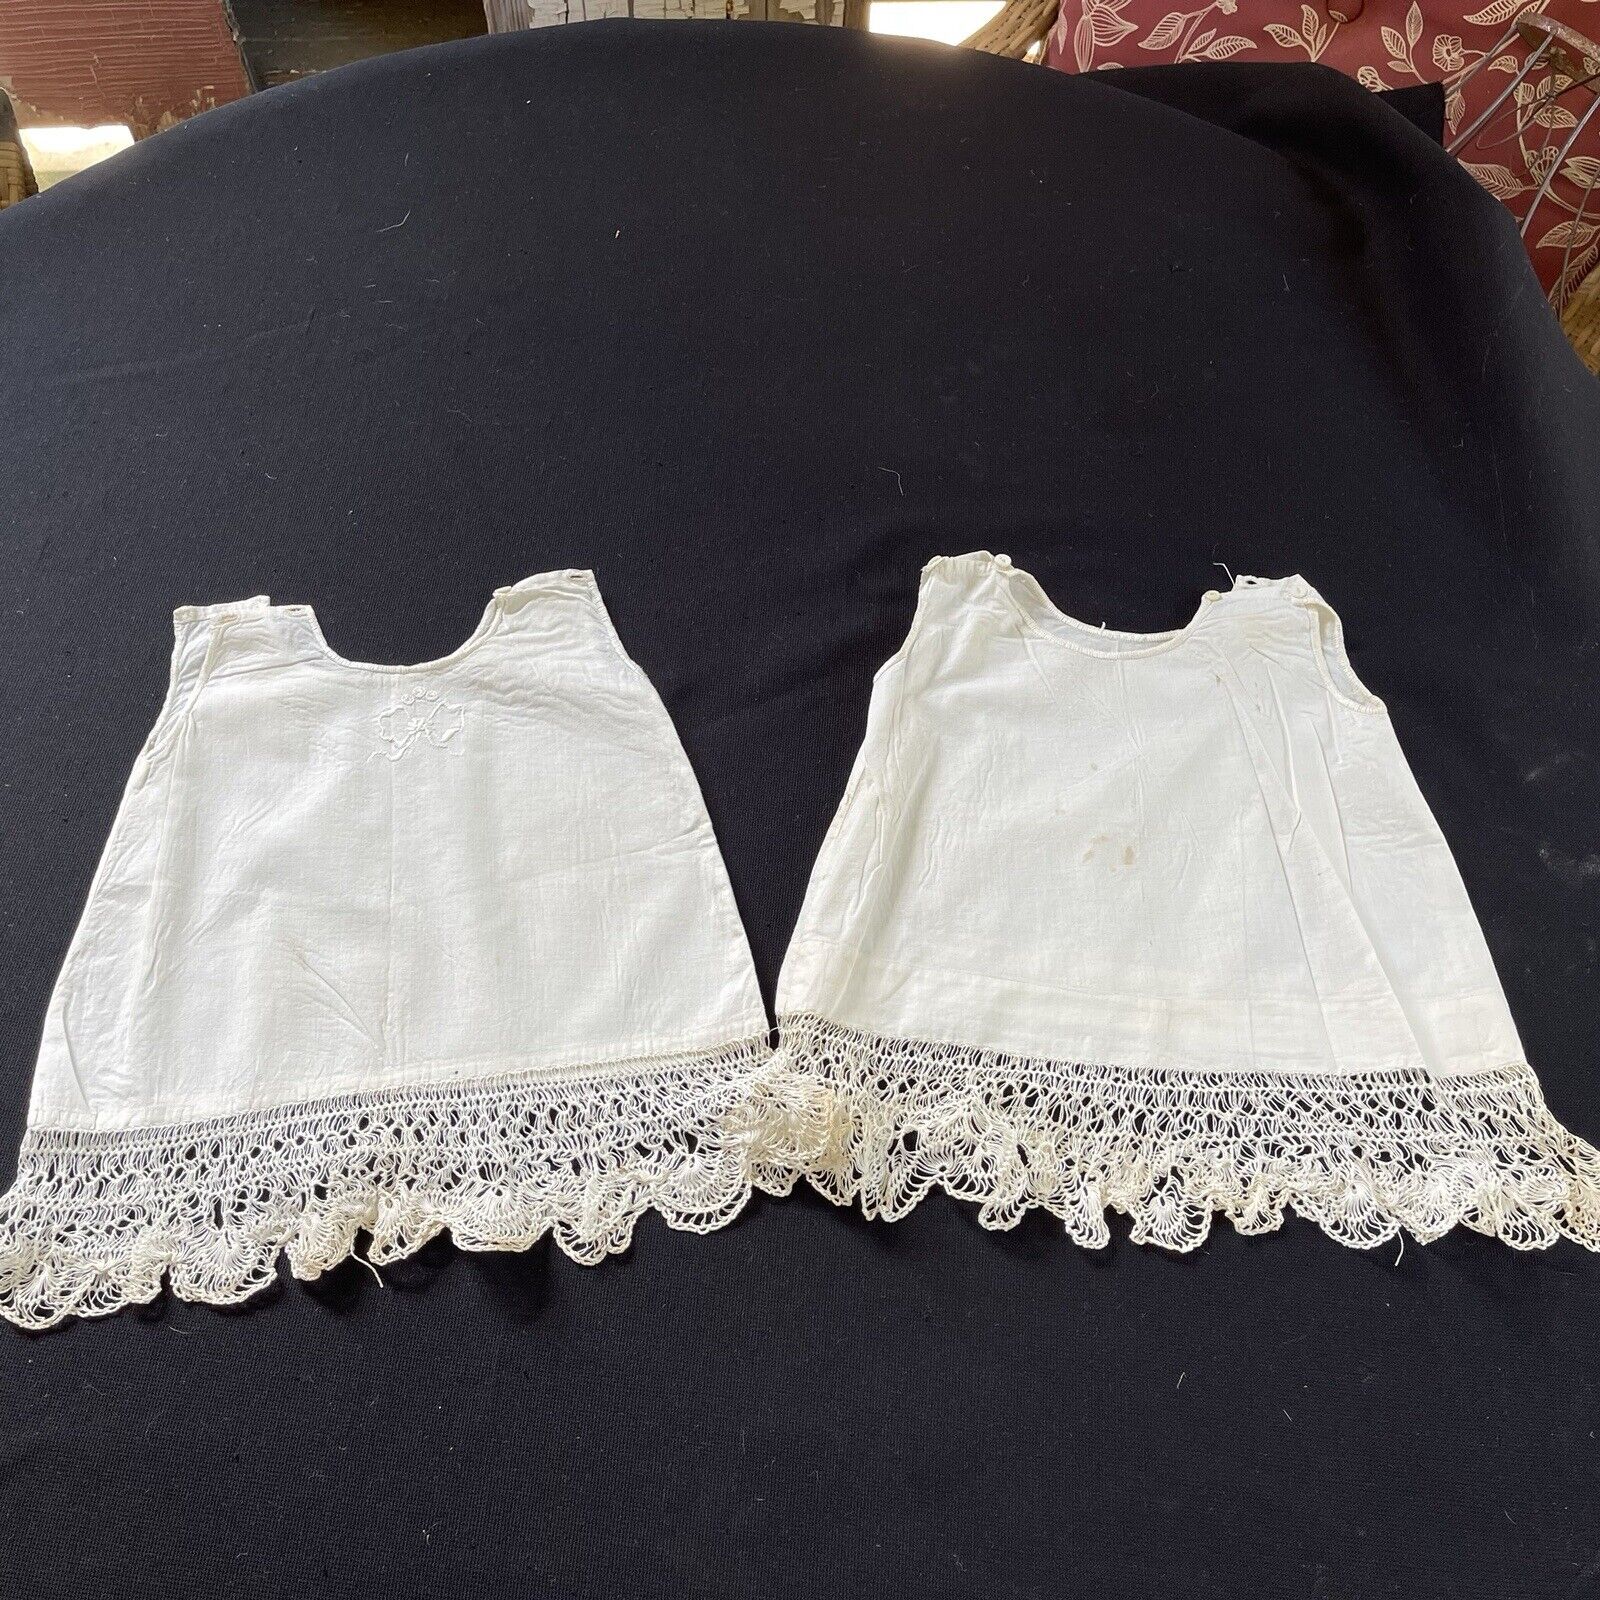 Pair Of Antique Off White Cotton Child’s Gowns Handmade Netted Or Hairpin Lace